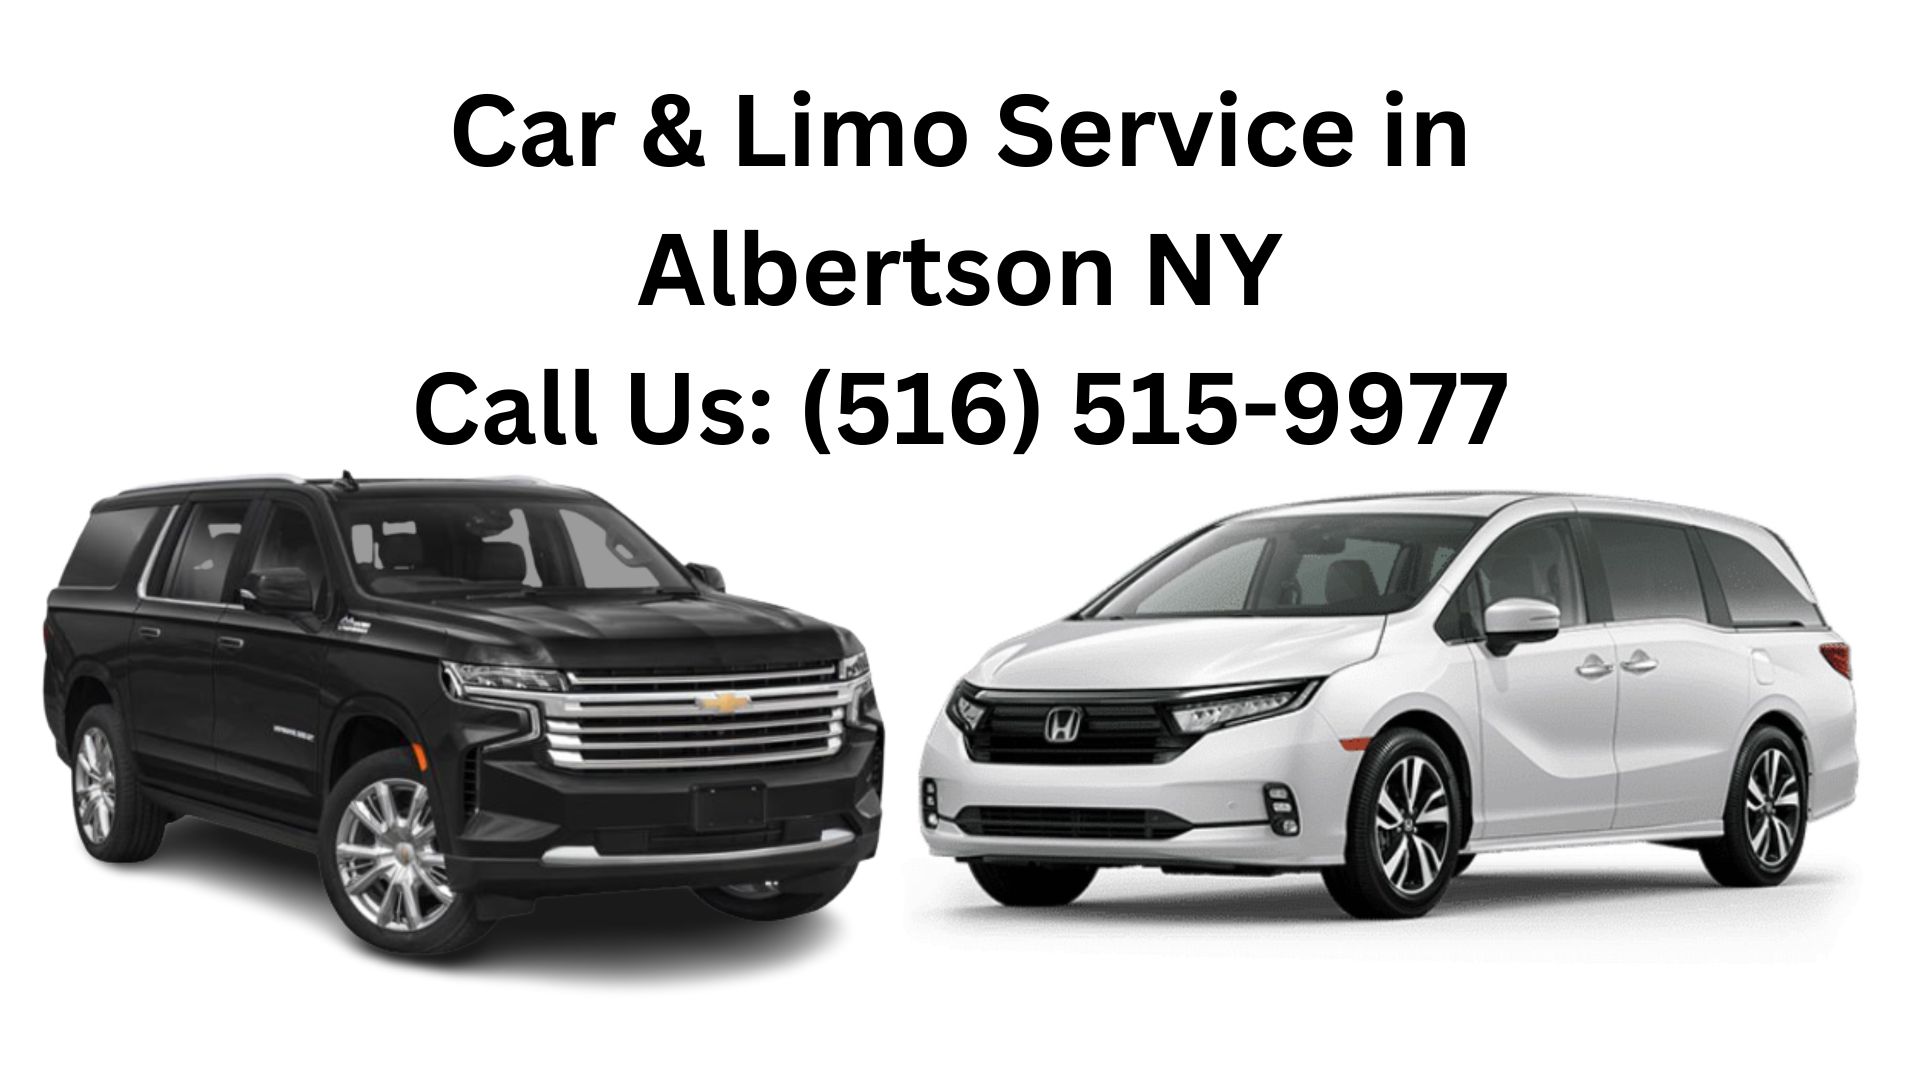 Car & Limo Service in Albertson NY